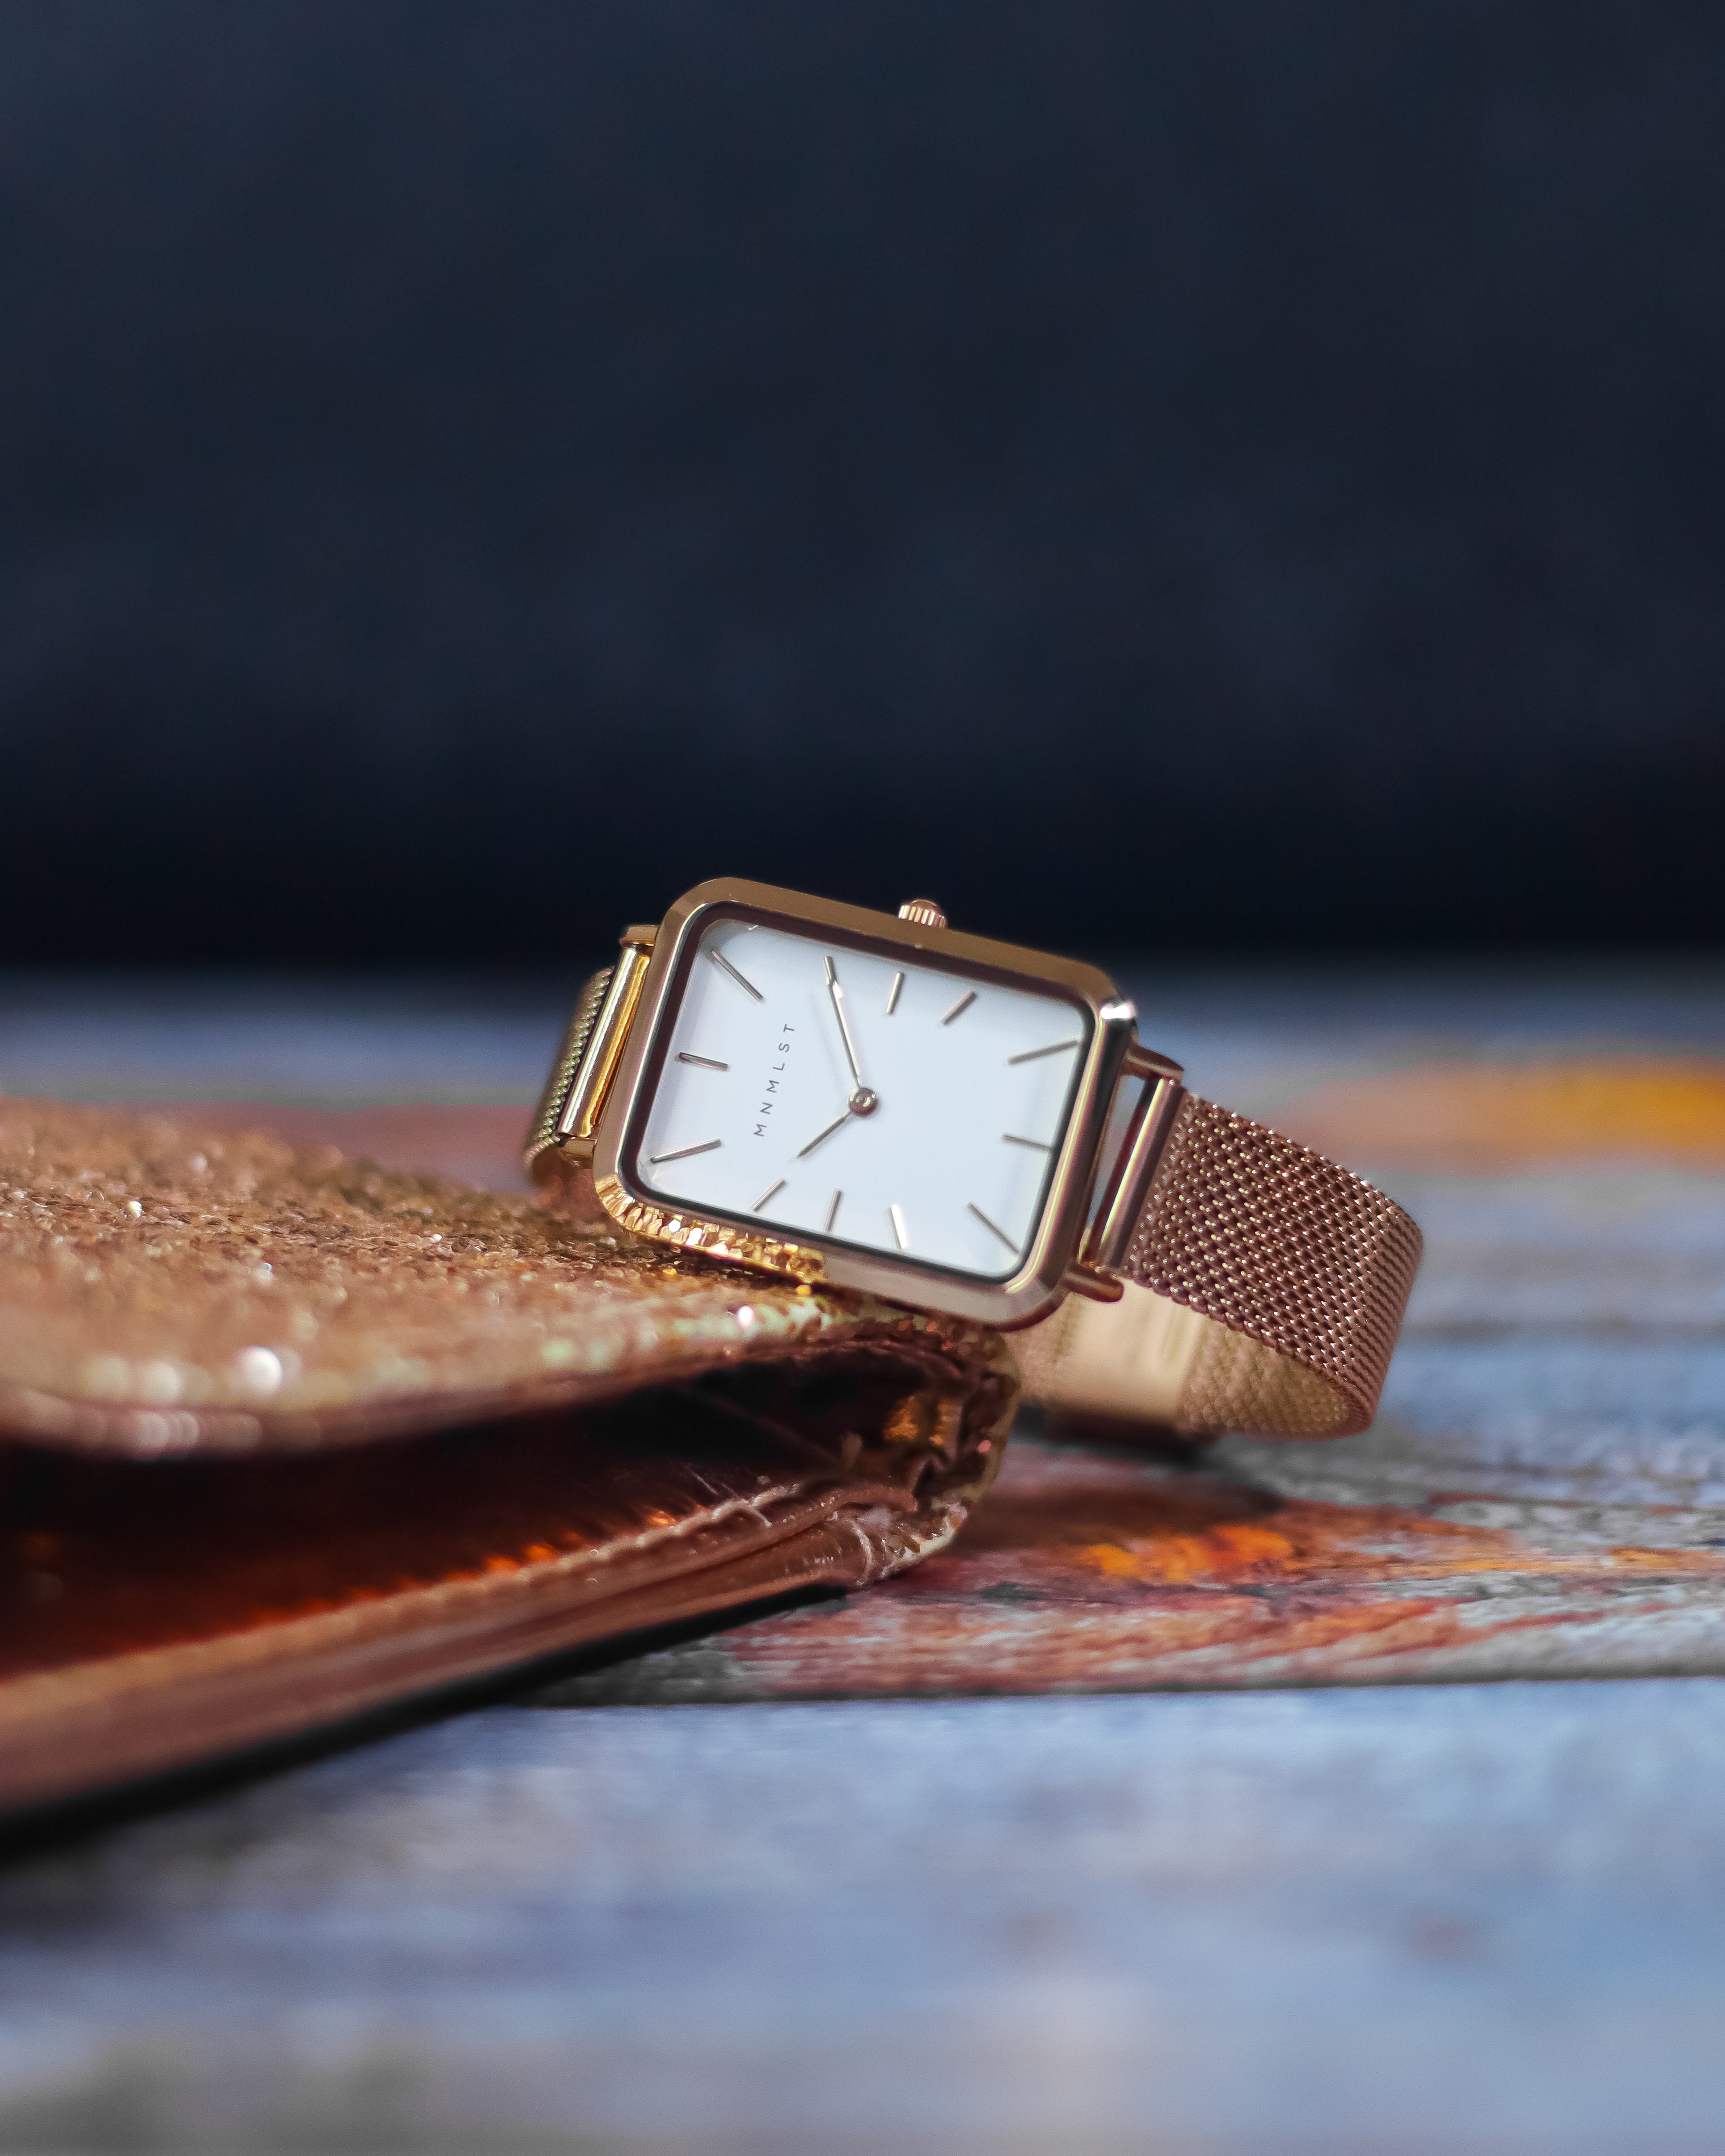 Five sophisticated watches to wear at the office - Talented Ladies Club